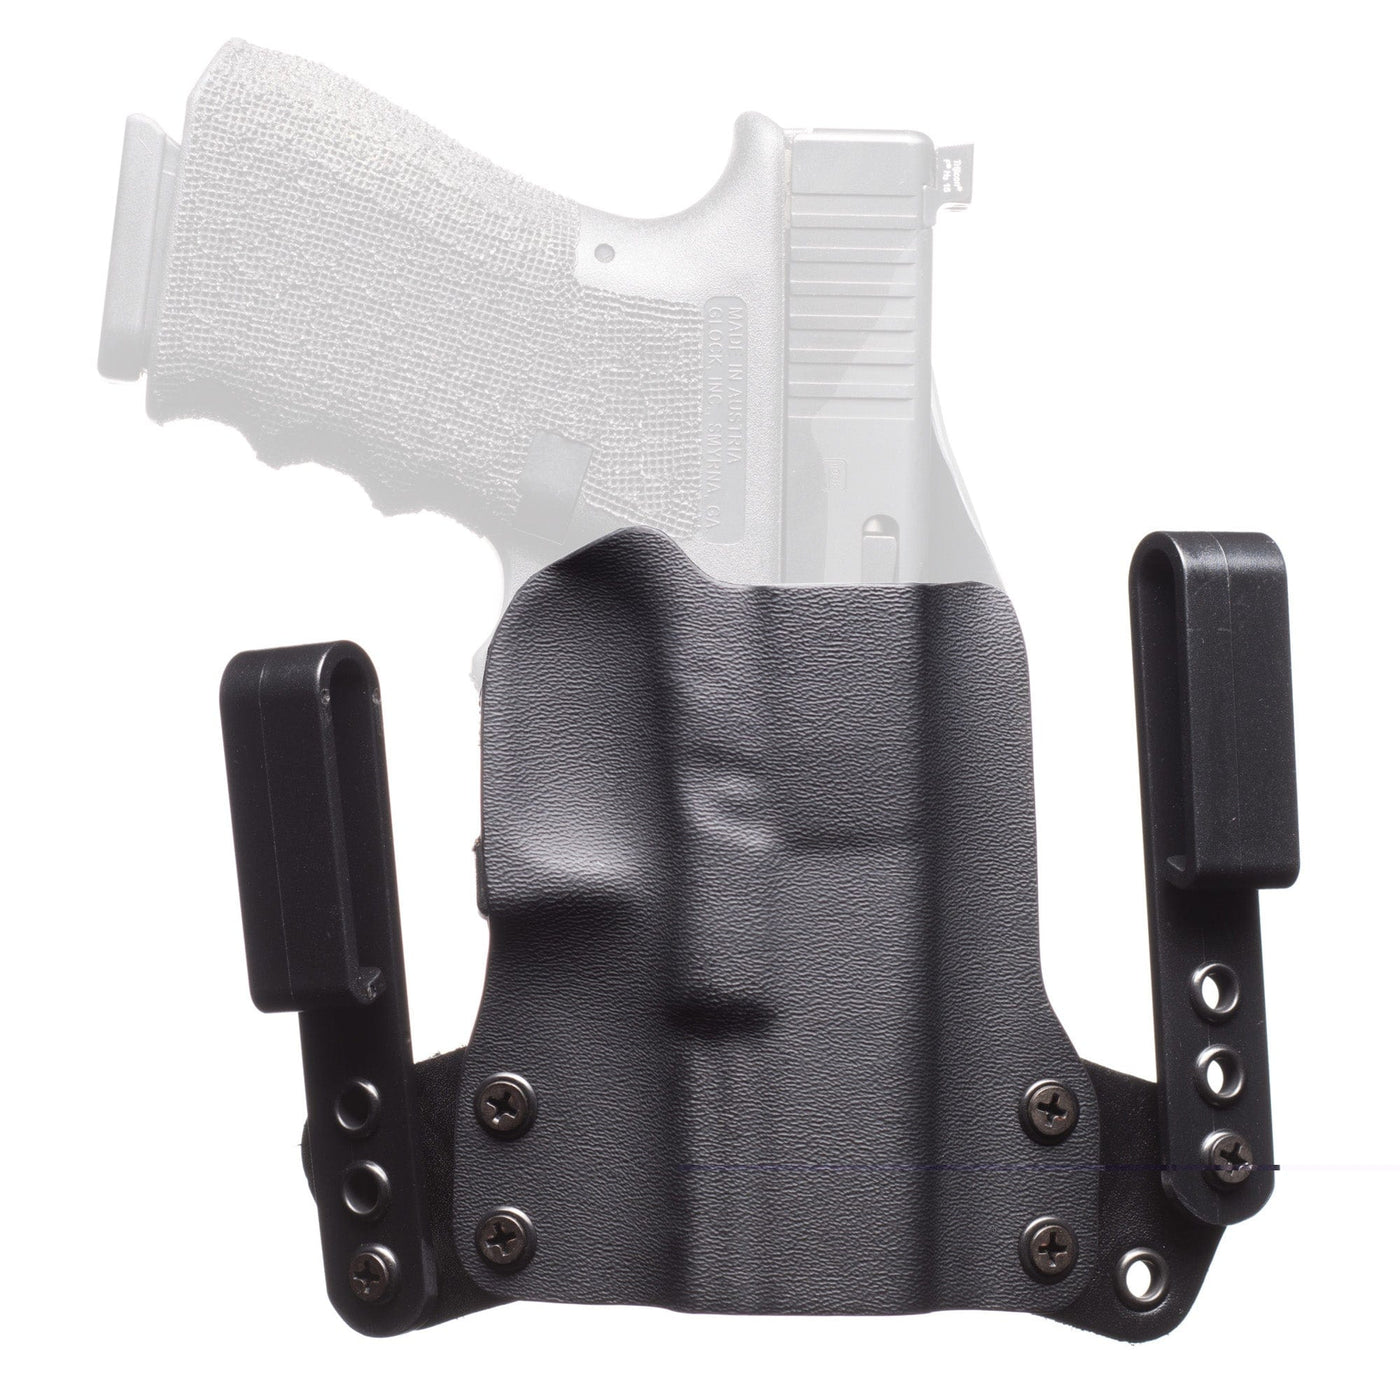 BlackPoint Tactical Blk Pnt Mini Wing Walther Pdp Rh Blk Holsters